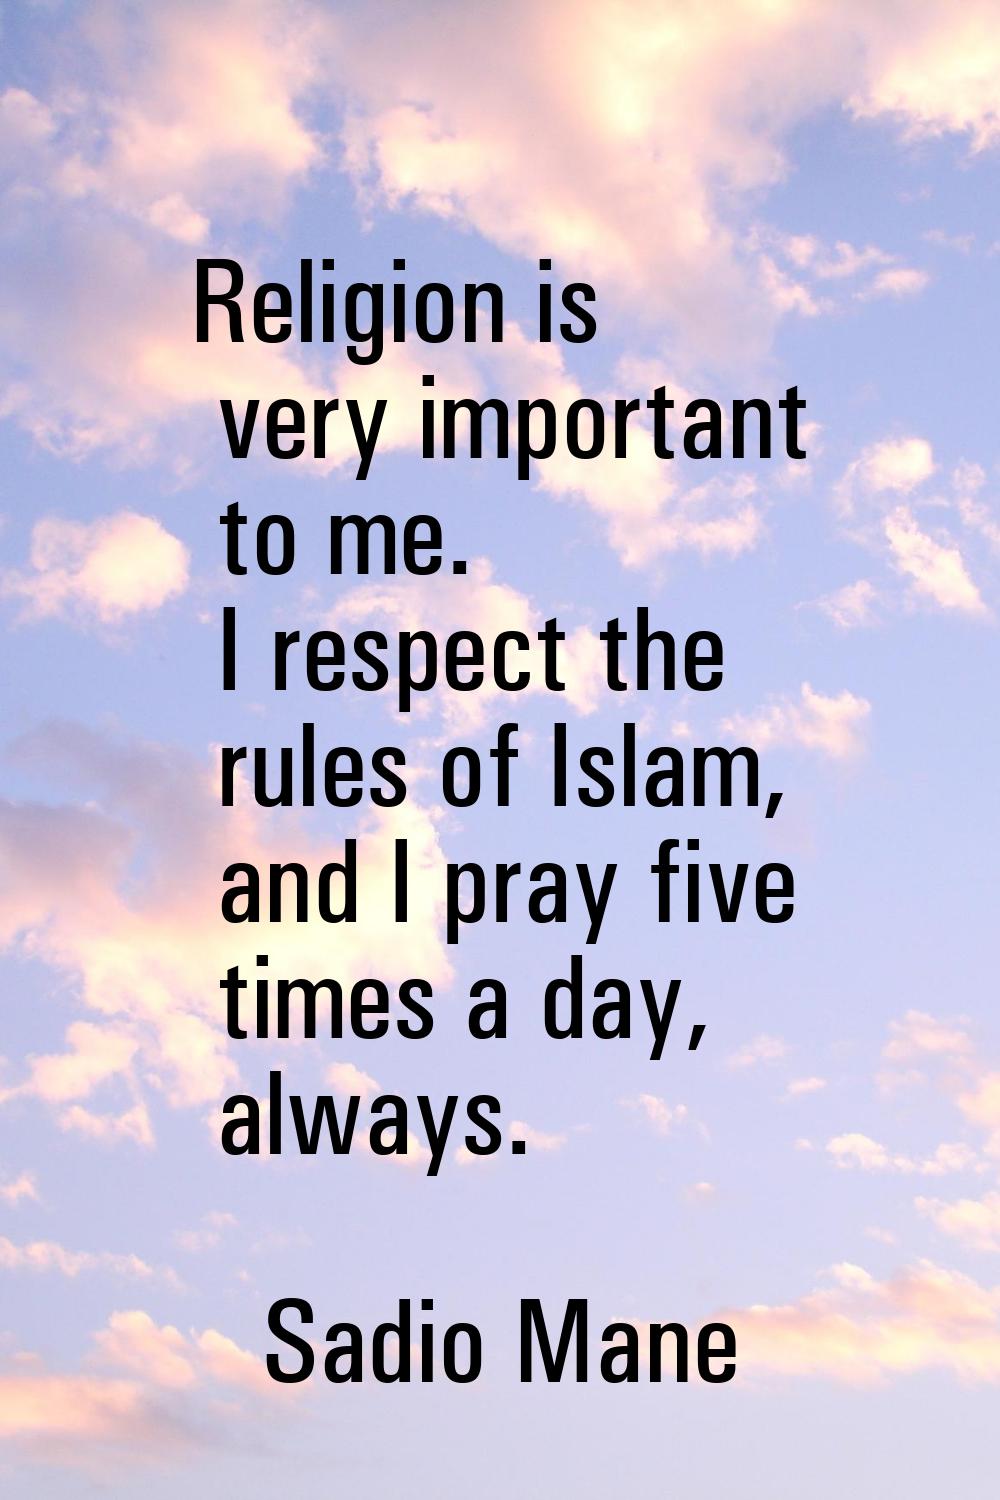 Religion is very important to me. I respect the rules of Islam, and I pray five times a day, always